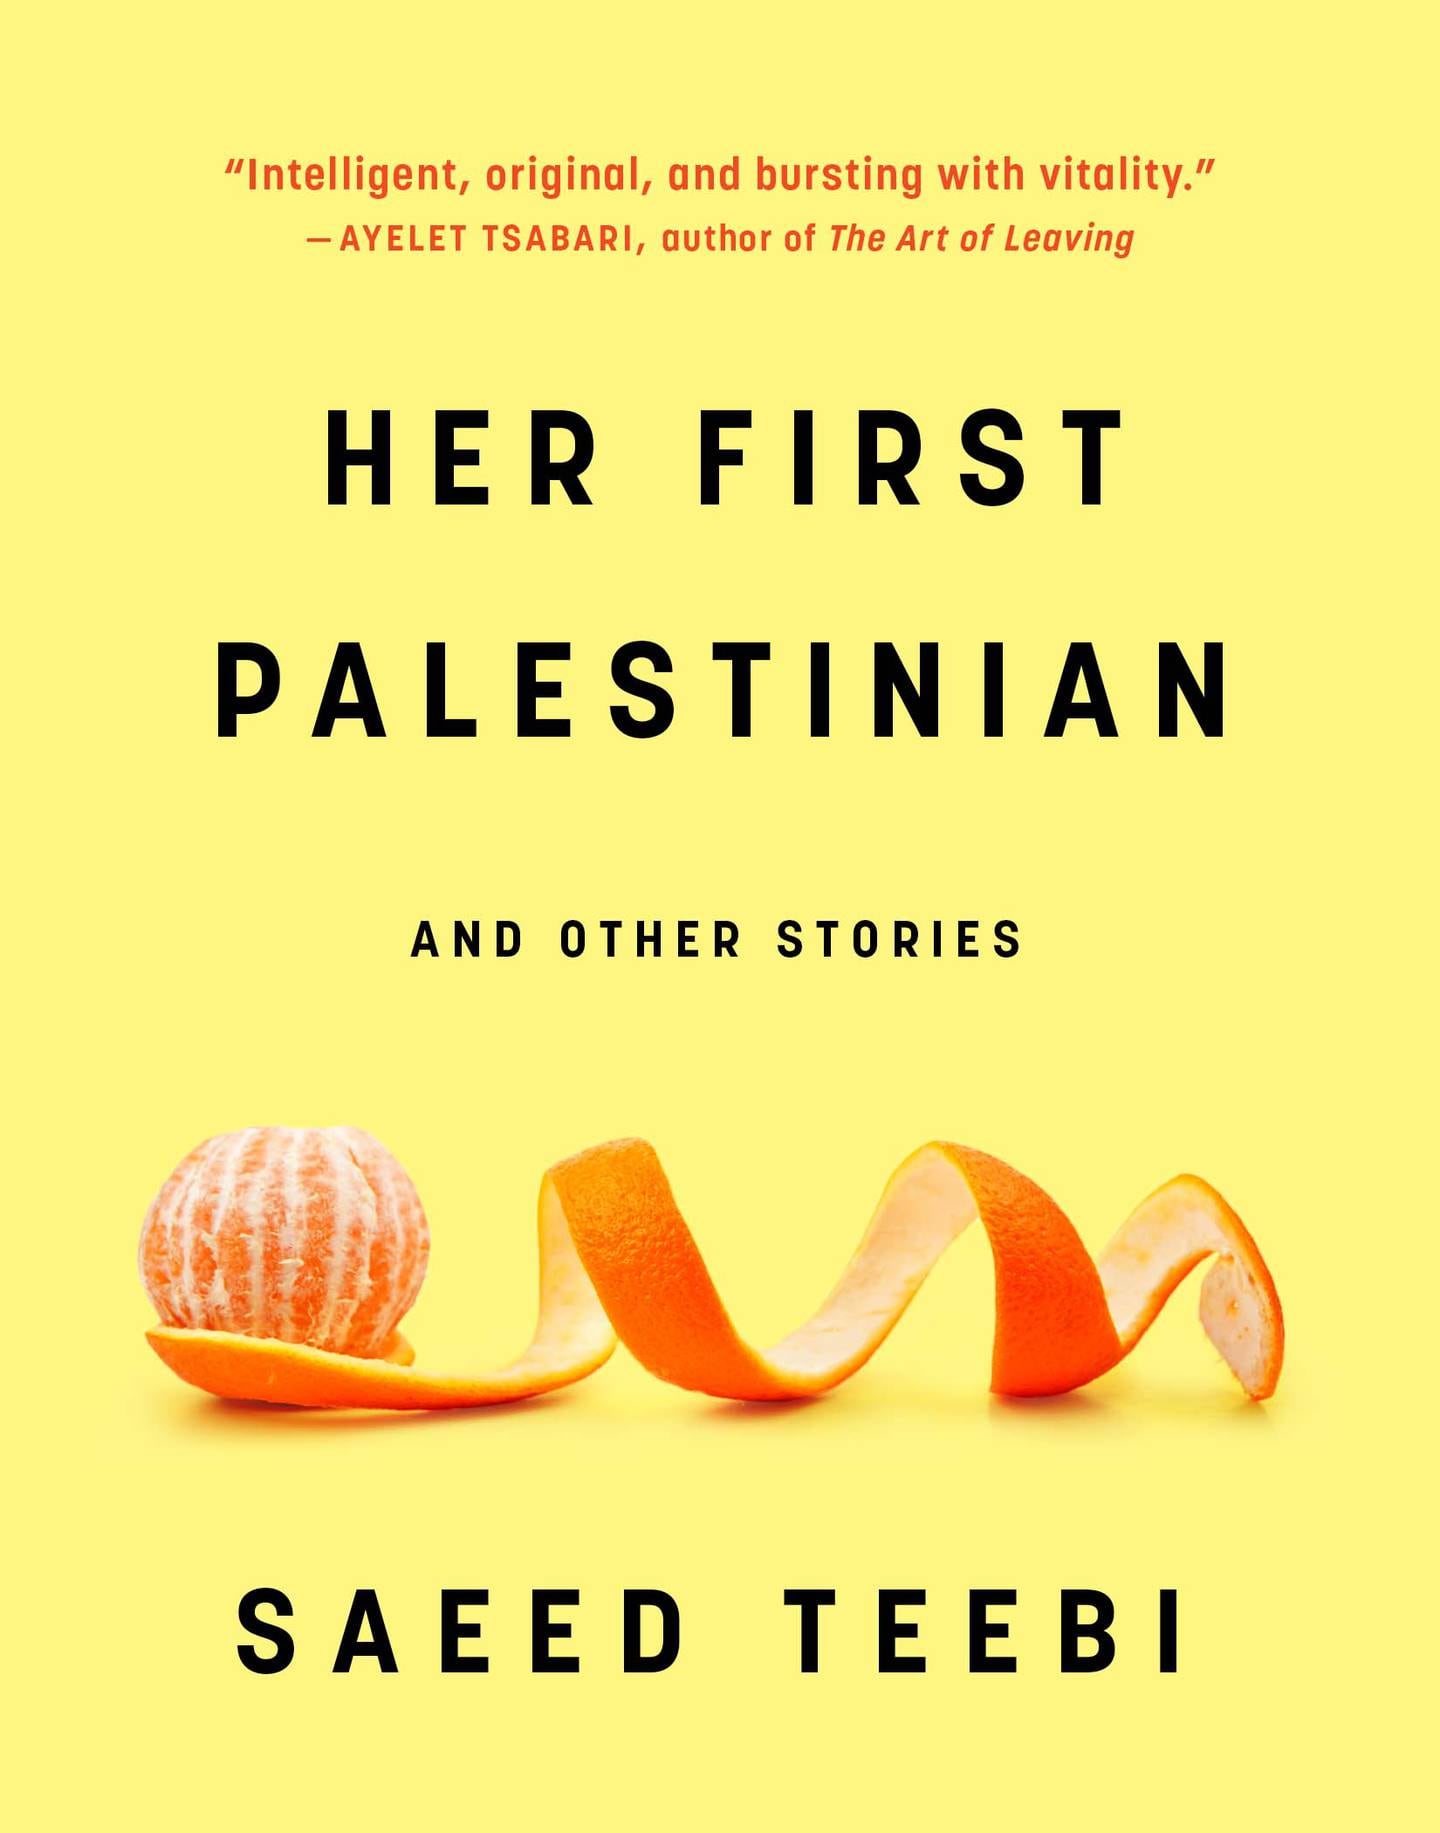 Saeed Teebi's short story collection, 'Her First Palestinian'. Photo: House of Anansi Press